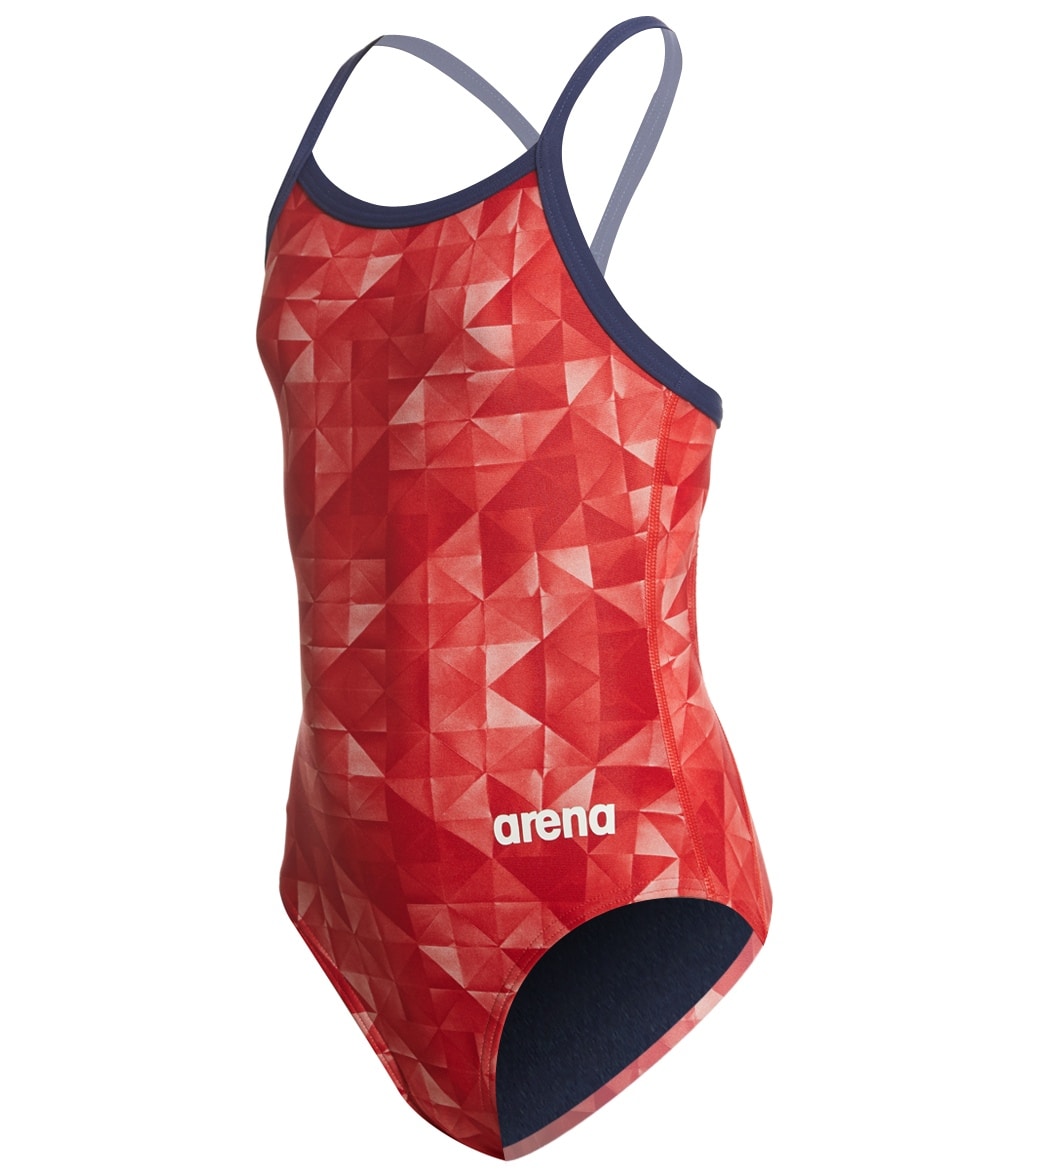 Arena Girls' Origami Maxlife Sporty Racer Back One Piece Swimsuit - Red/Navy 22 Polyester/Pbt - Swimoutlet.com